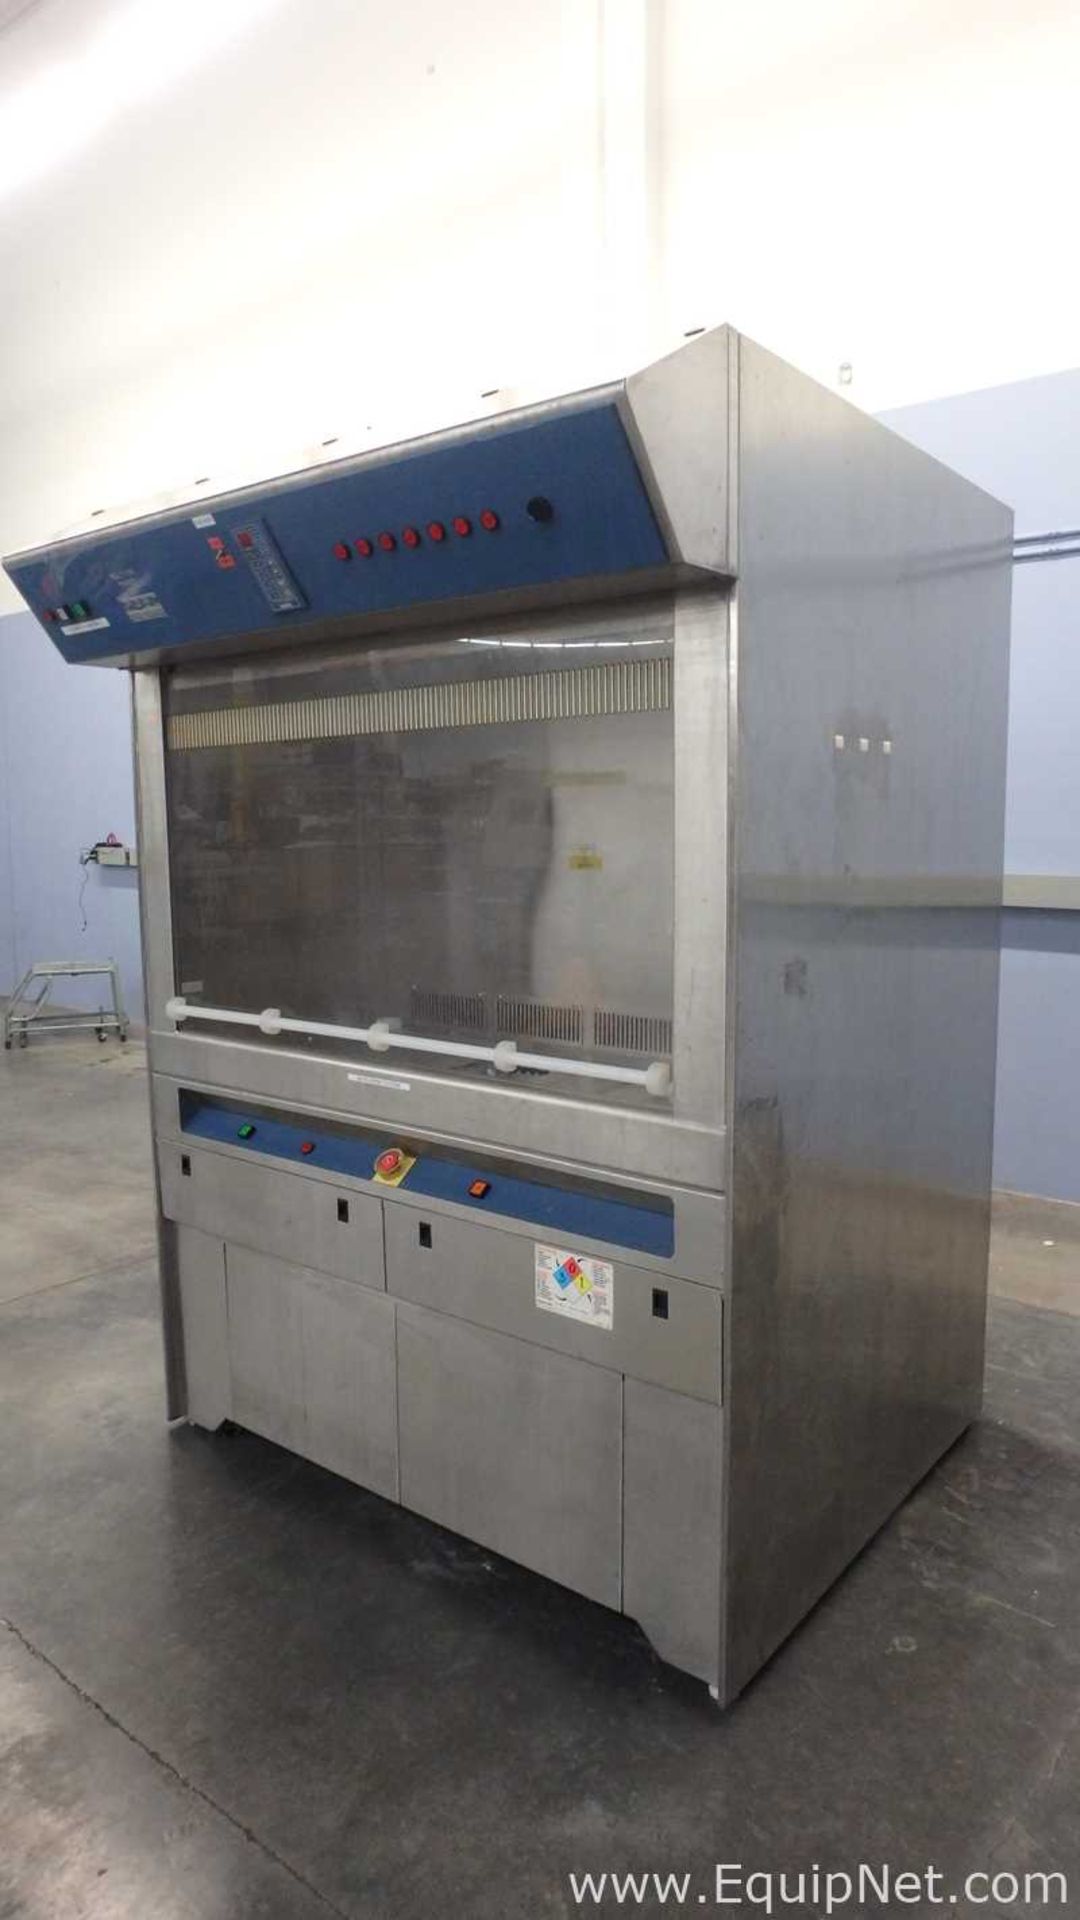 SPEC Semiconductor Process Equipment SBX5-36 Photoresist Developer System - Image 12 of 31